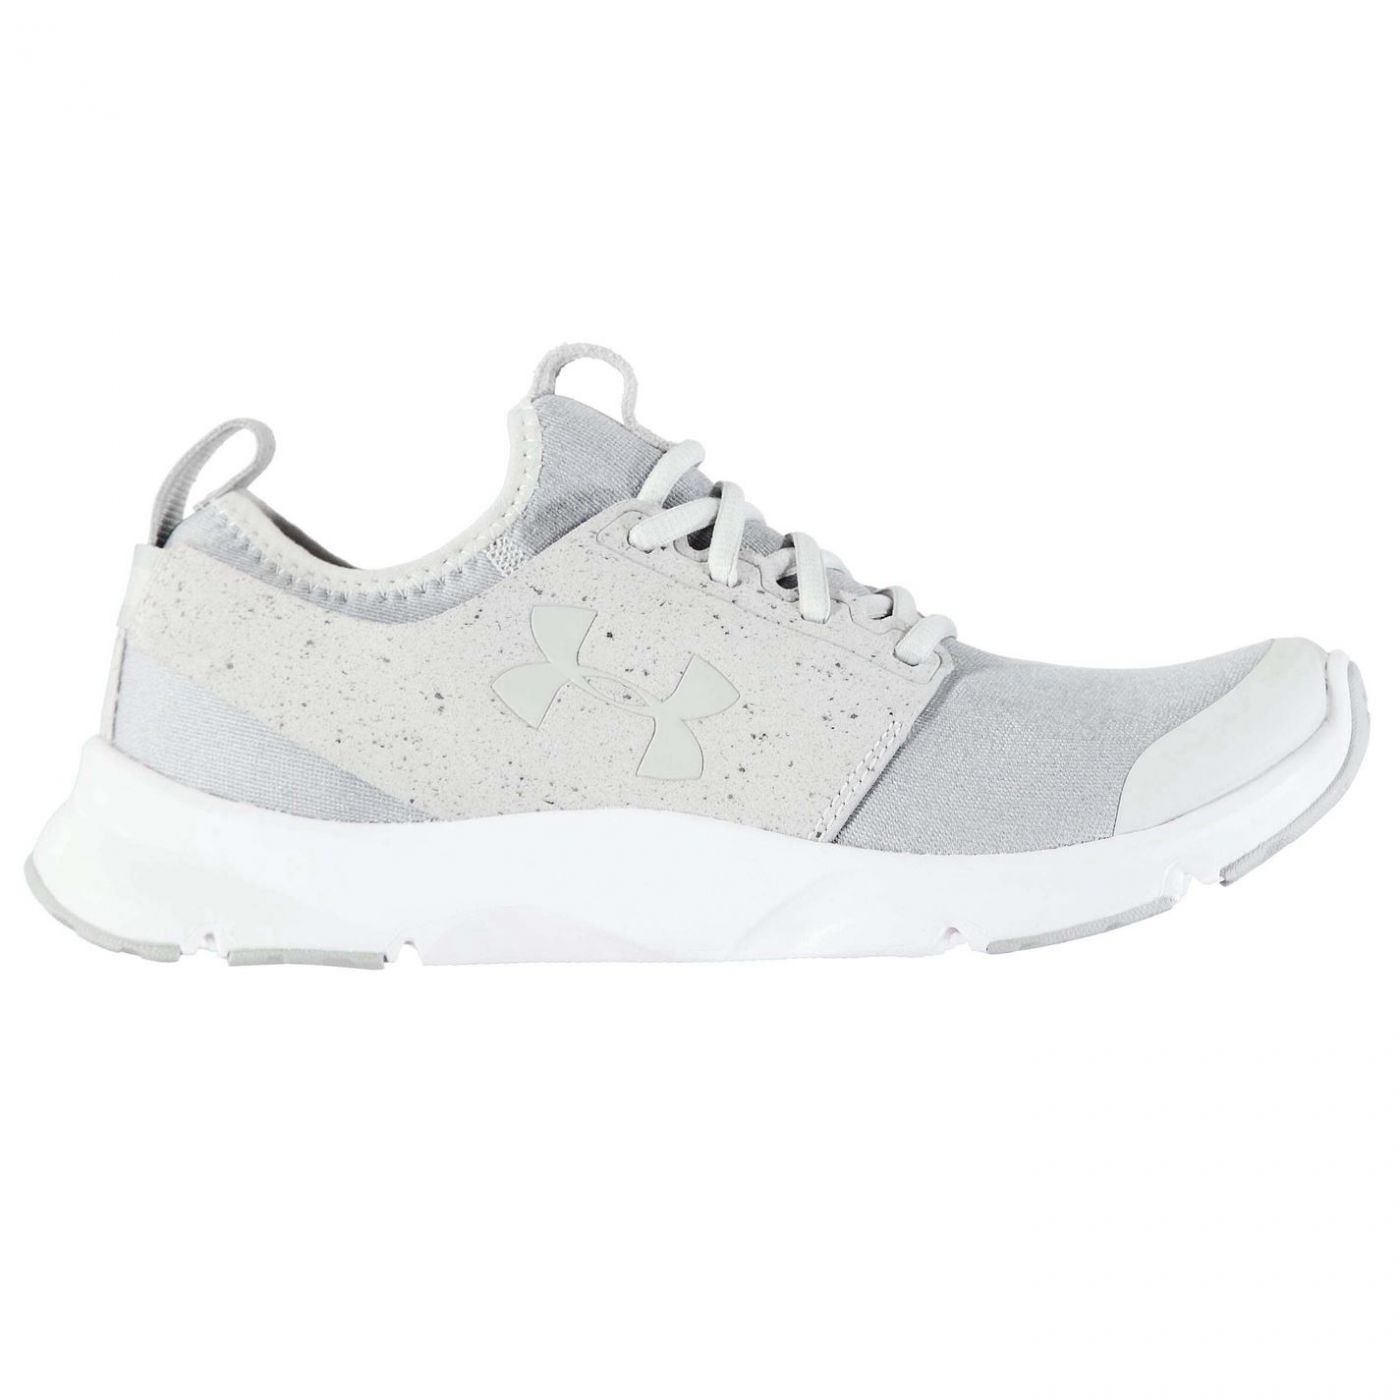 Under Armour Drift Running Shoes Ladies